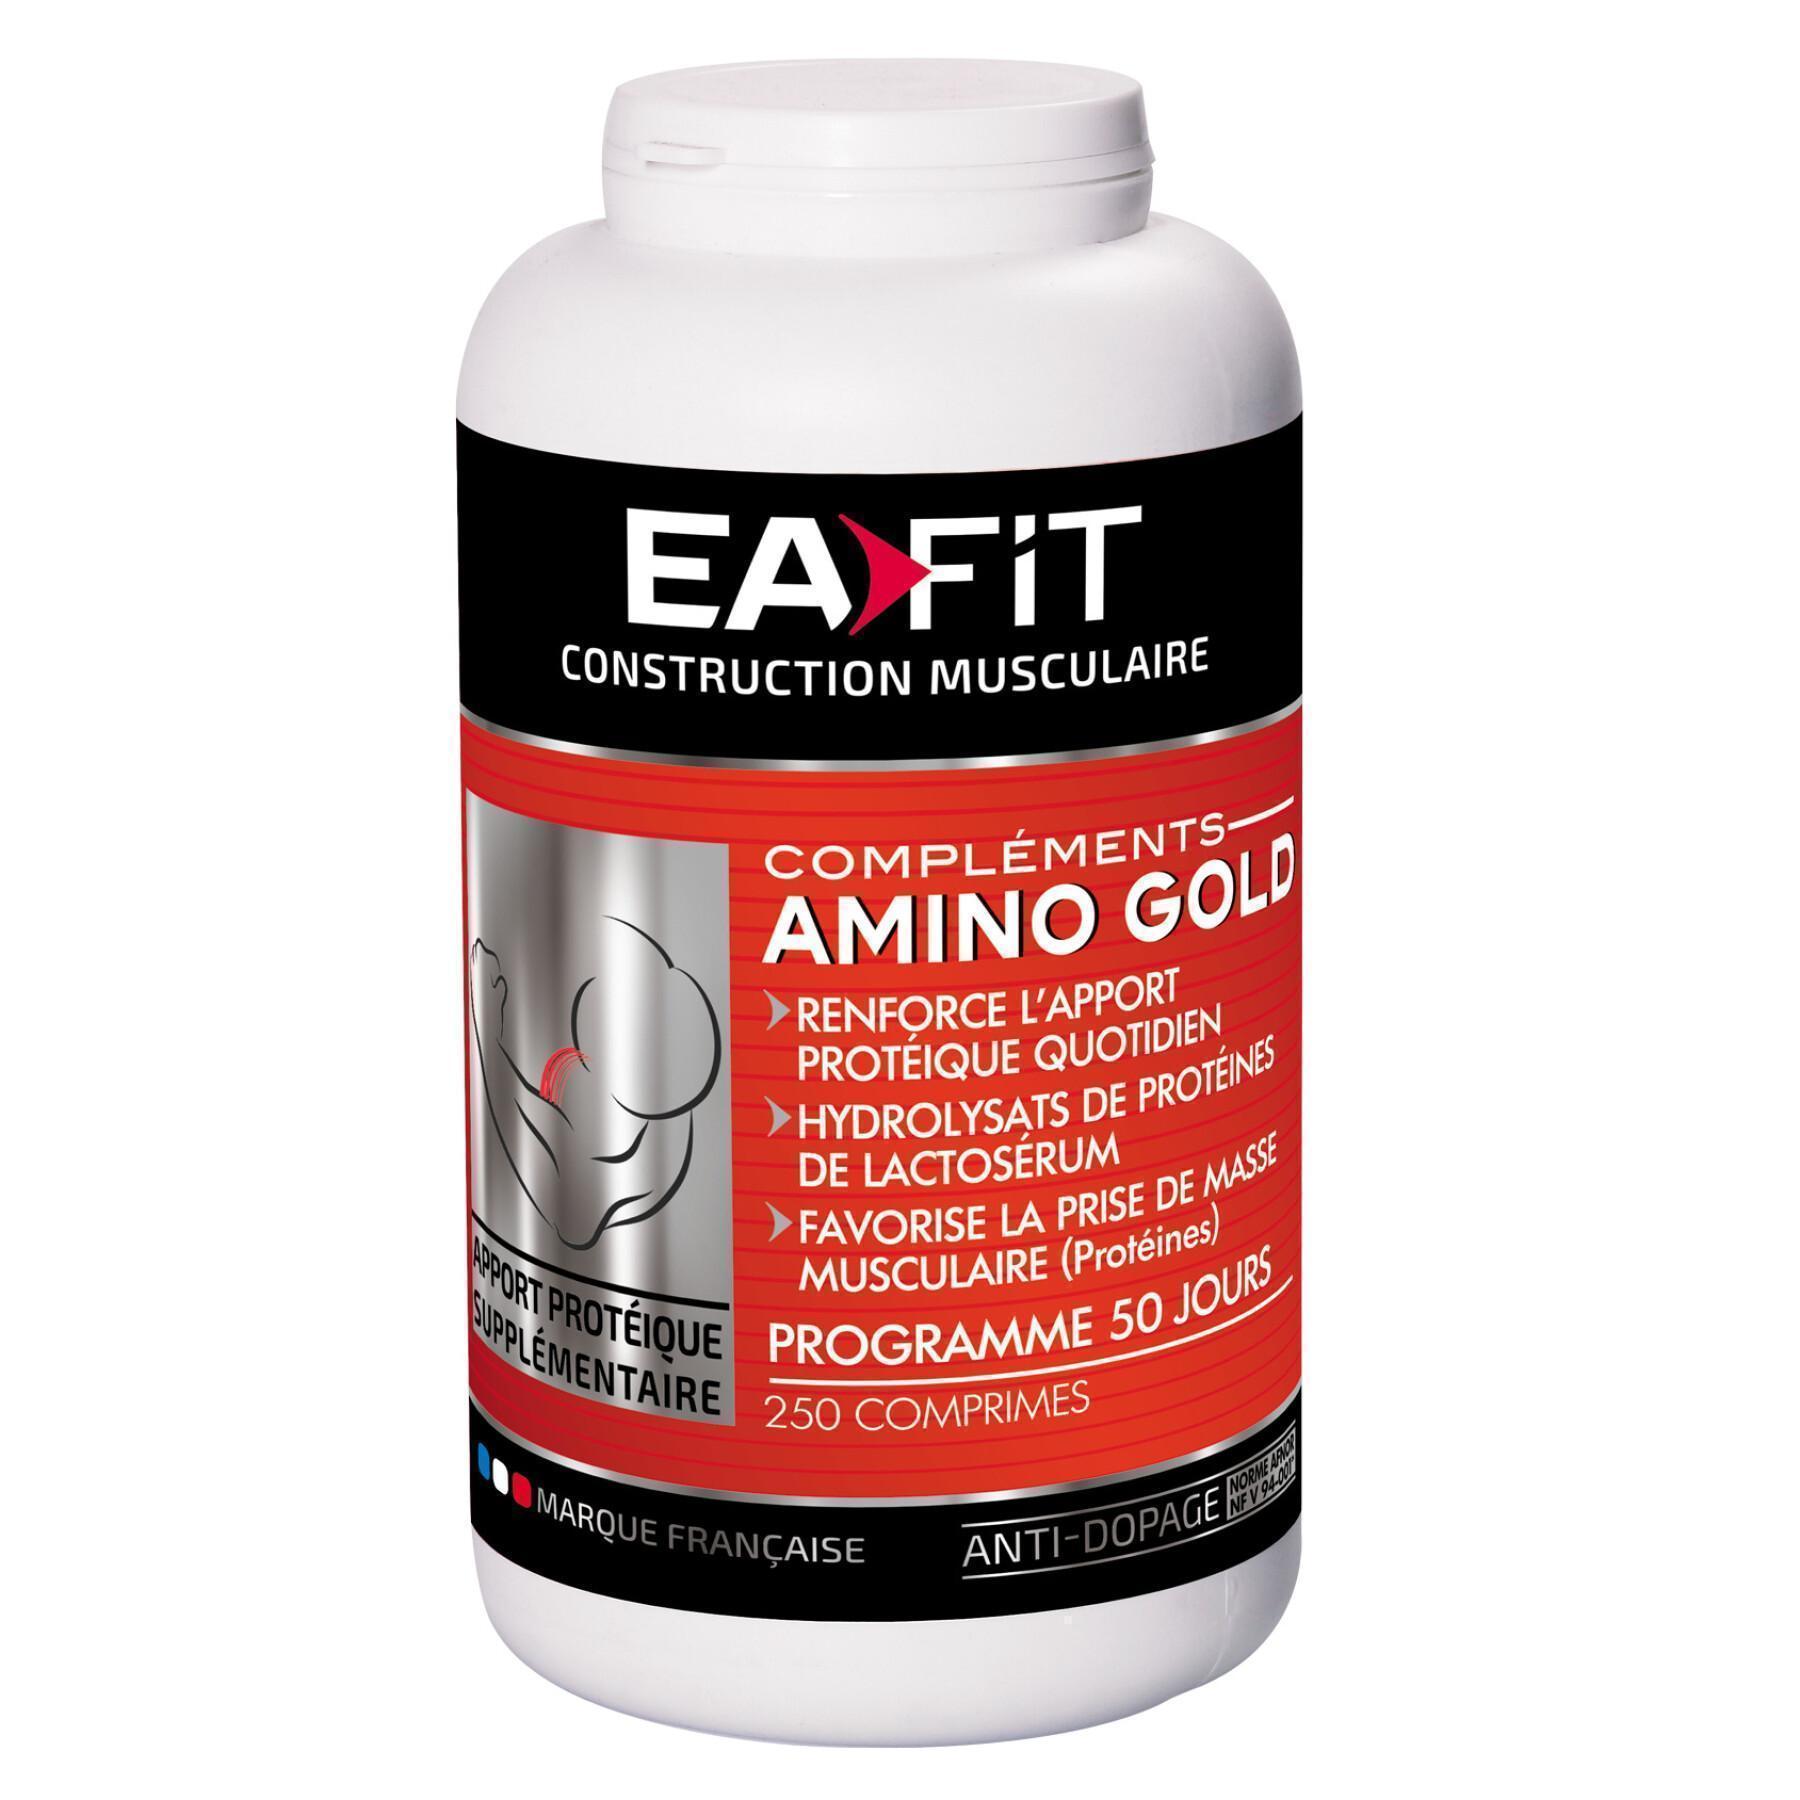 Amino guld EA Fit (50 tablettes)